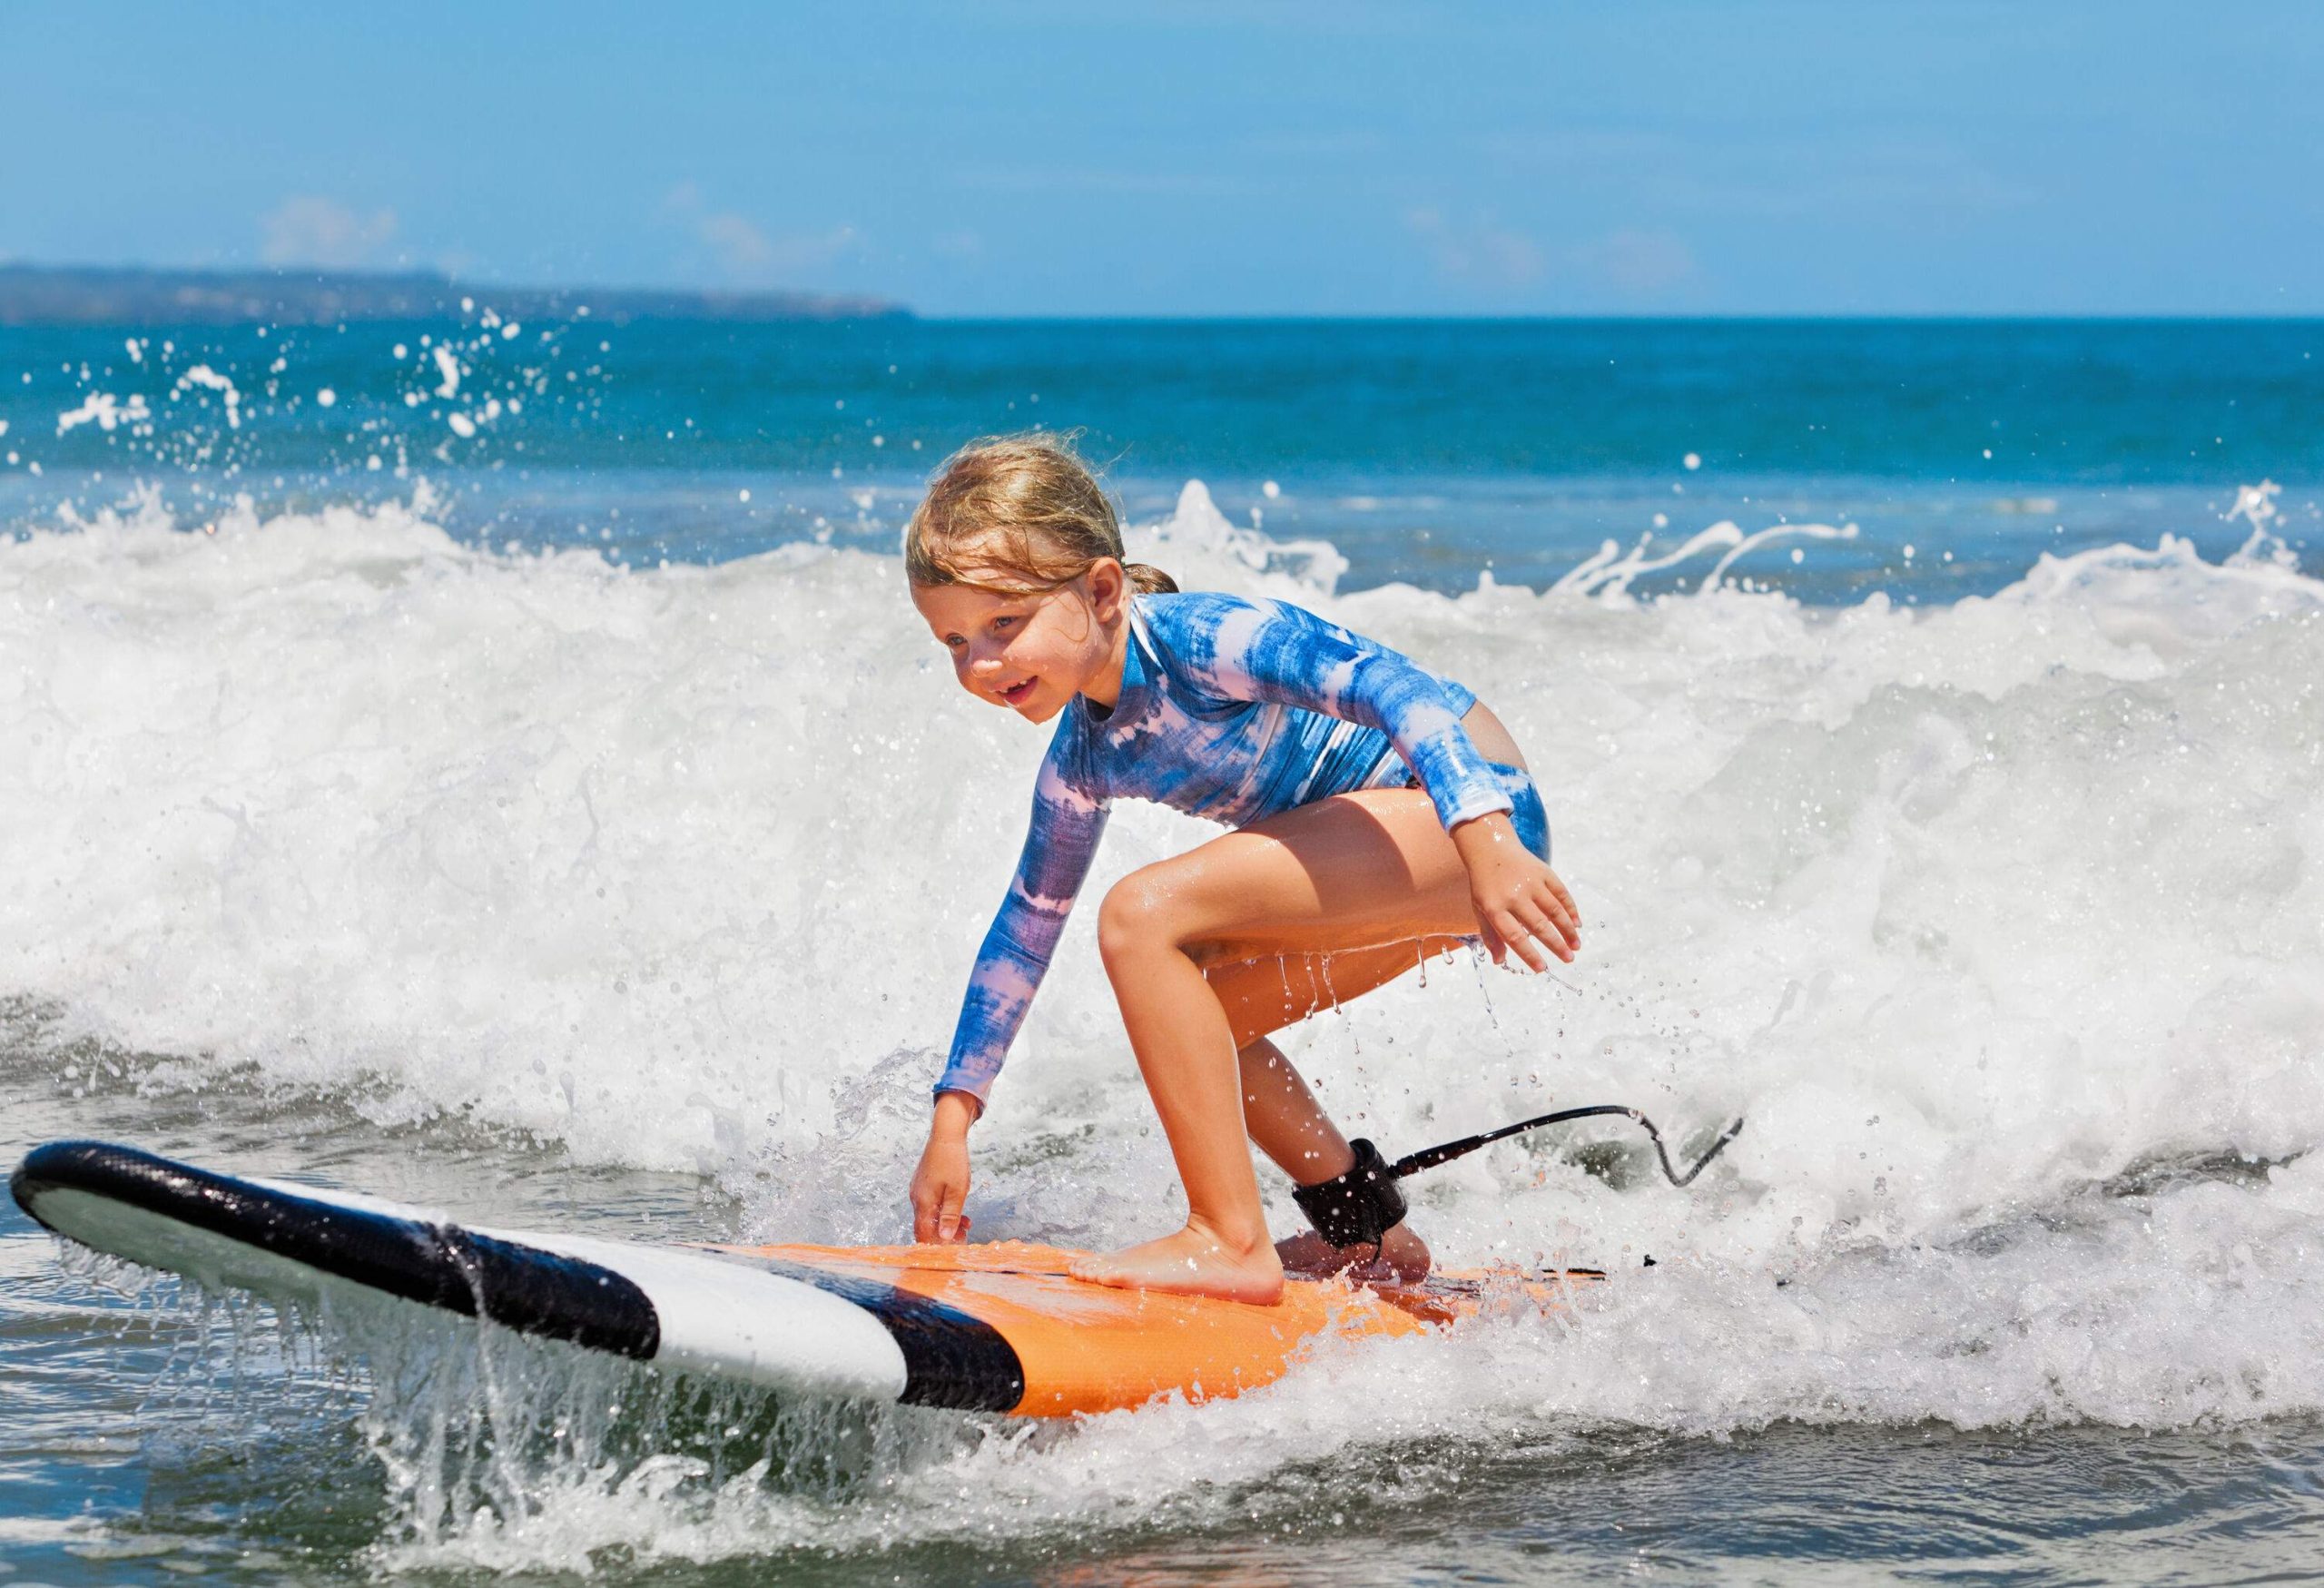 A young blonde girl smiles as she balances on a surfboard with crashing waves behind her.